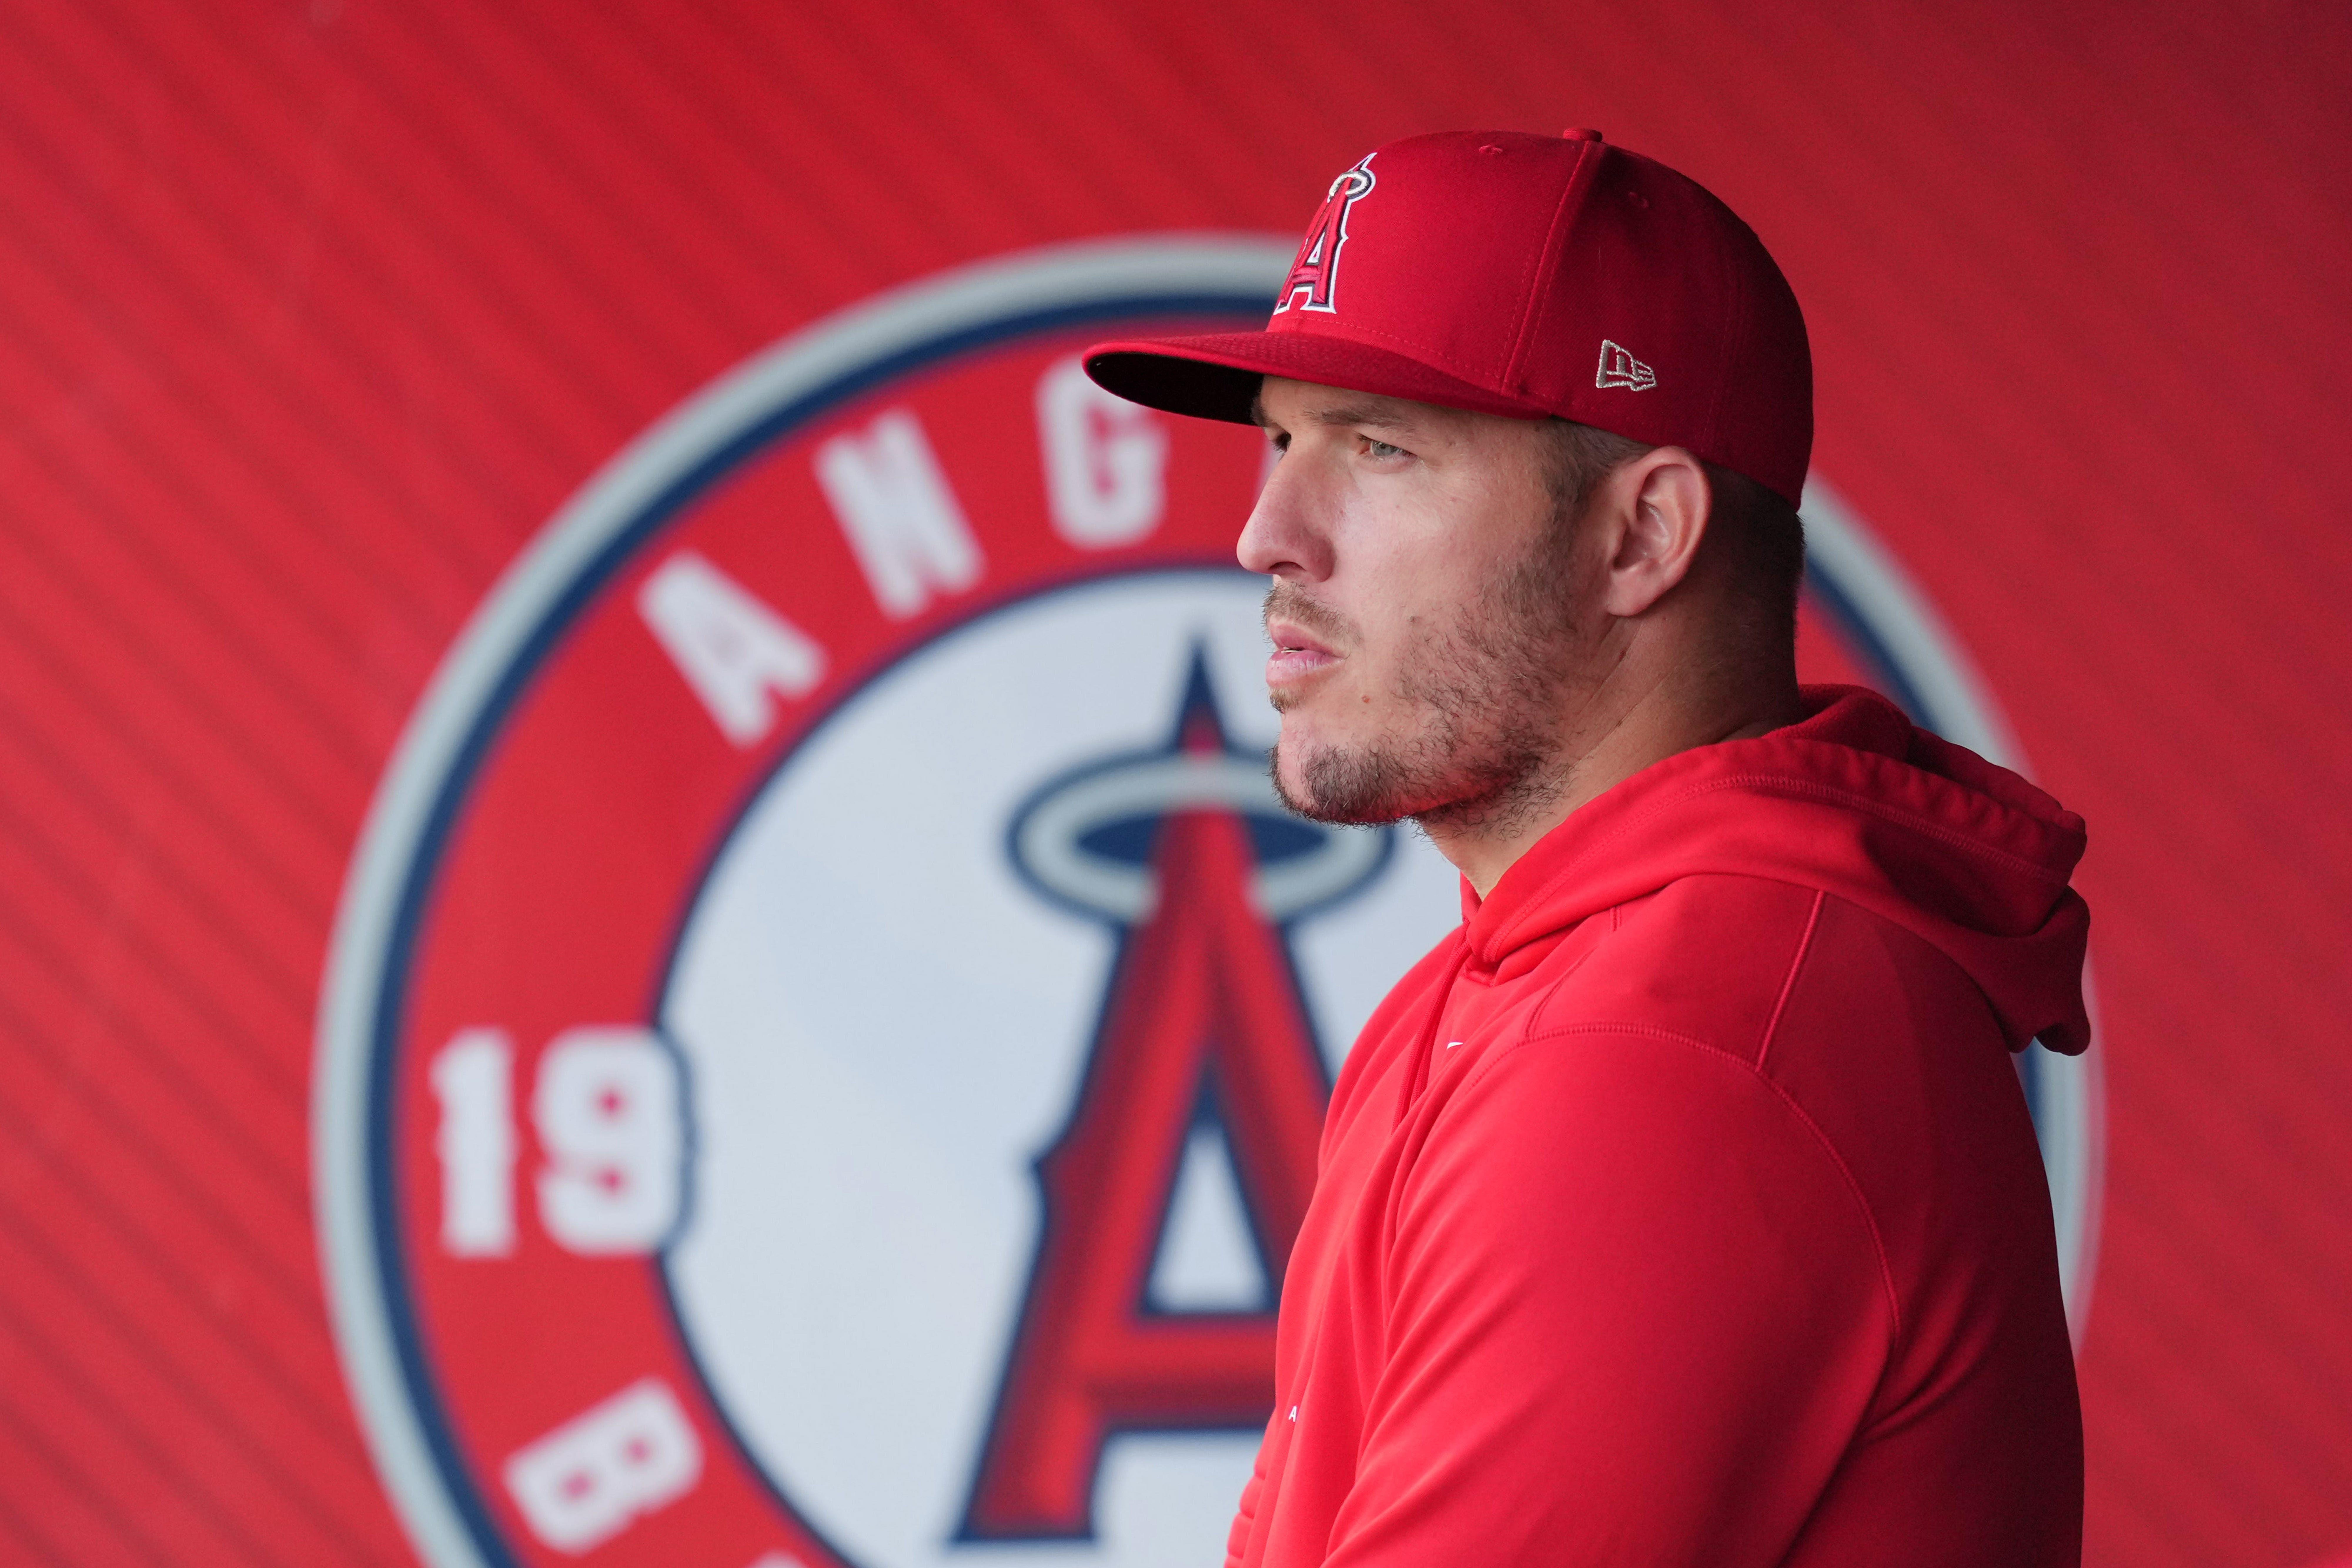 Angels' Mike Trout suffers another major injury, ending season for three-time MVP